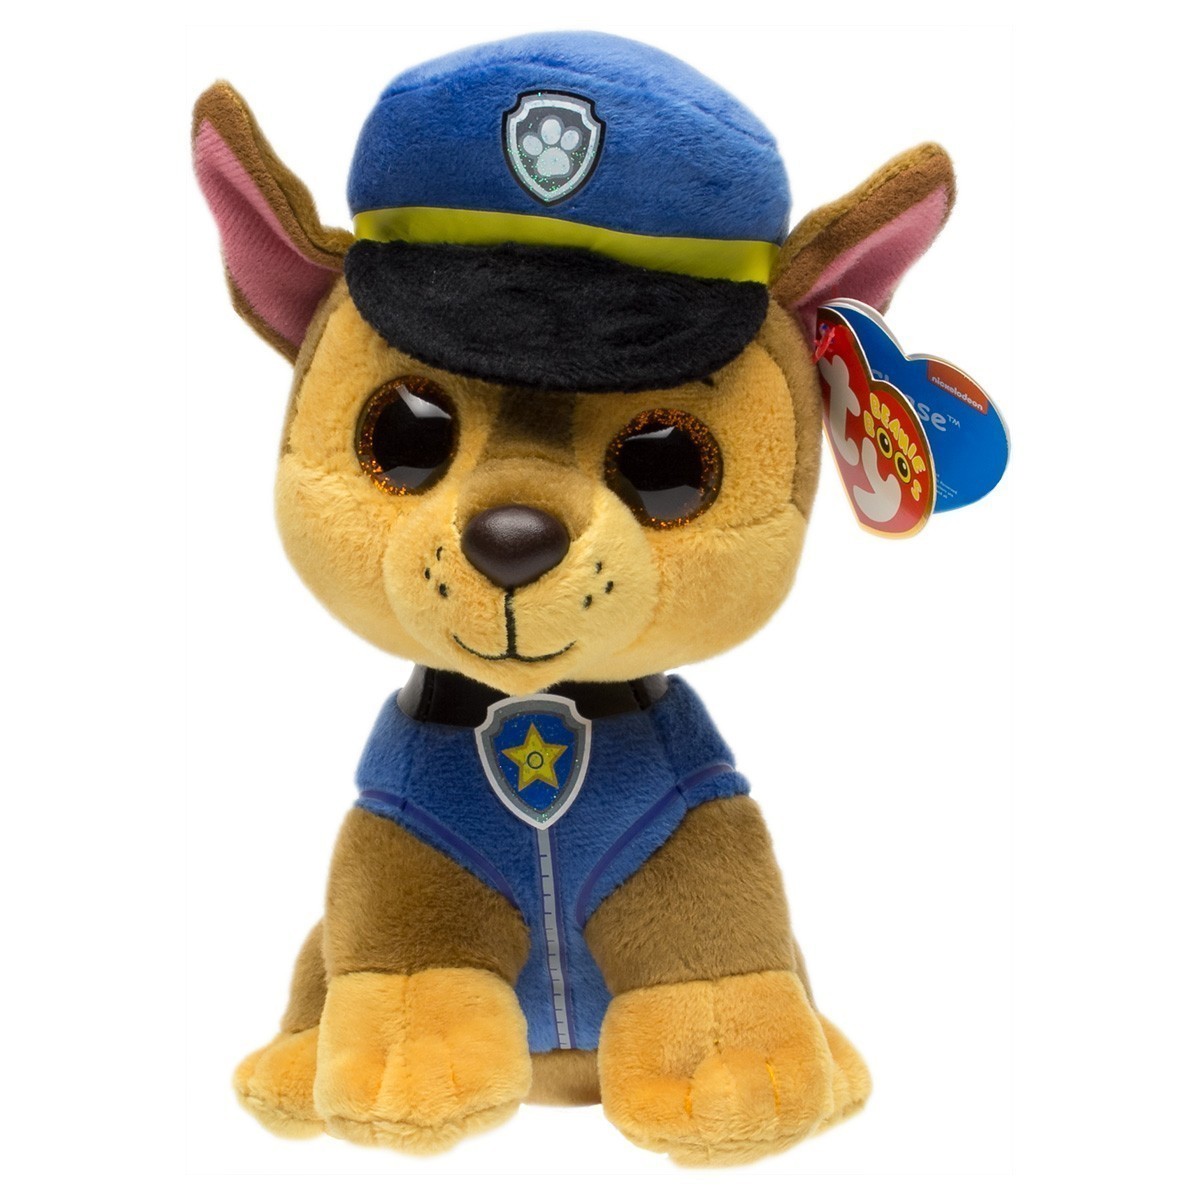 Nickelodeon - Paw Patrol Beanie Boo Collection - Chase